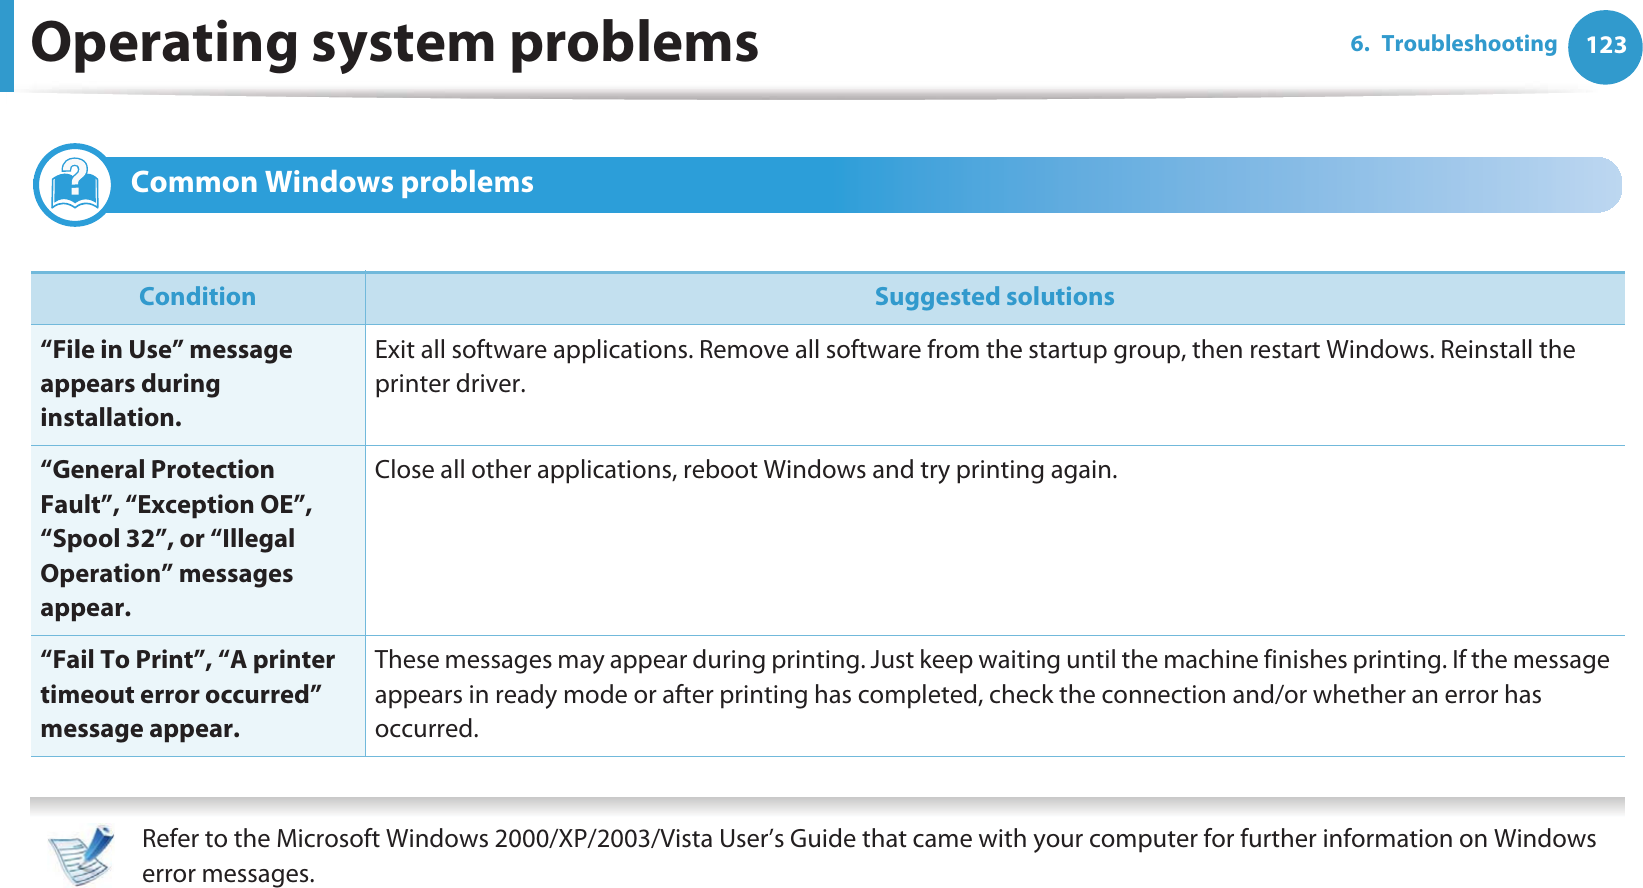 1236. TroubleshootingOperating system problems1 Common Windows problems   Refer to the Microsoft Windows 2000/XP/2003/Vista User’s Guide that came with your computer for further information on Windows error messages. Condition Suggested solutions“File in Use” message appears during installation.Exit all software applications. Remove all software from the startup group, then restart Windows. Reinstall the printer driver.“General Protection Fault”, “Exception OE”, “Spool 32”, or “Illegal Operation” messages appear.Close all other applications, reboot Windows and try printing again.“Fail To Print”, “A printer timeout error occurred” message appear.These messages may appear during printing. Just keep waiting until the machine finishes printing. If the message appears in ready mode or after printing has completed, check the connection and/or whether an error has occurred.